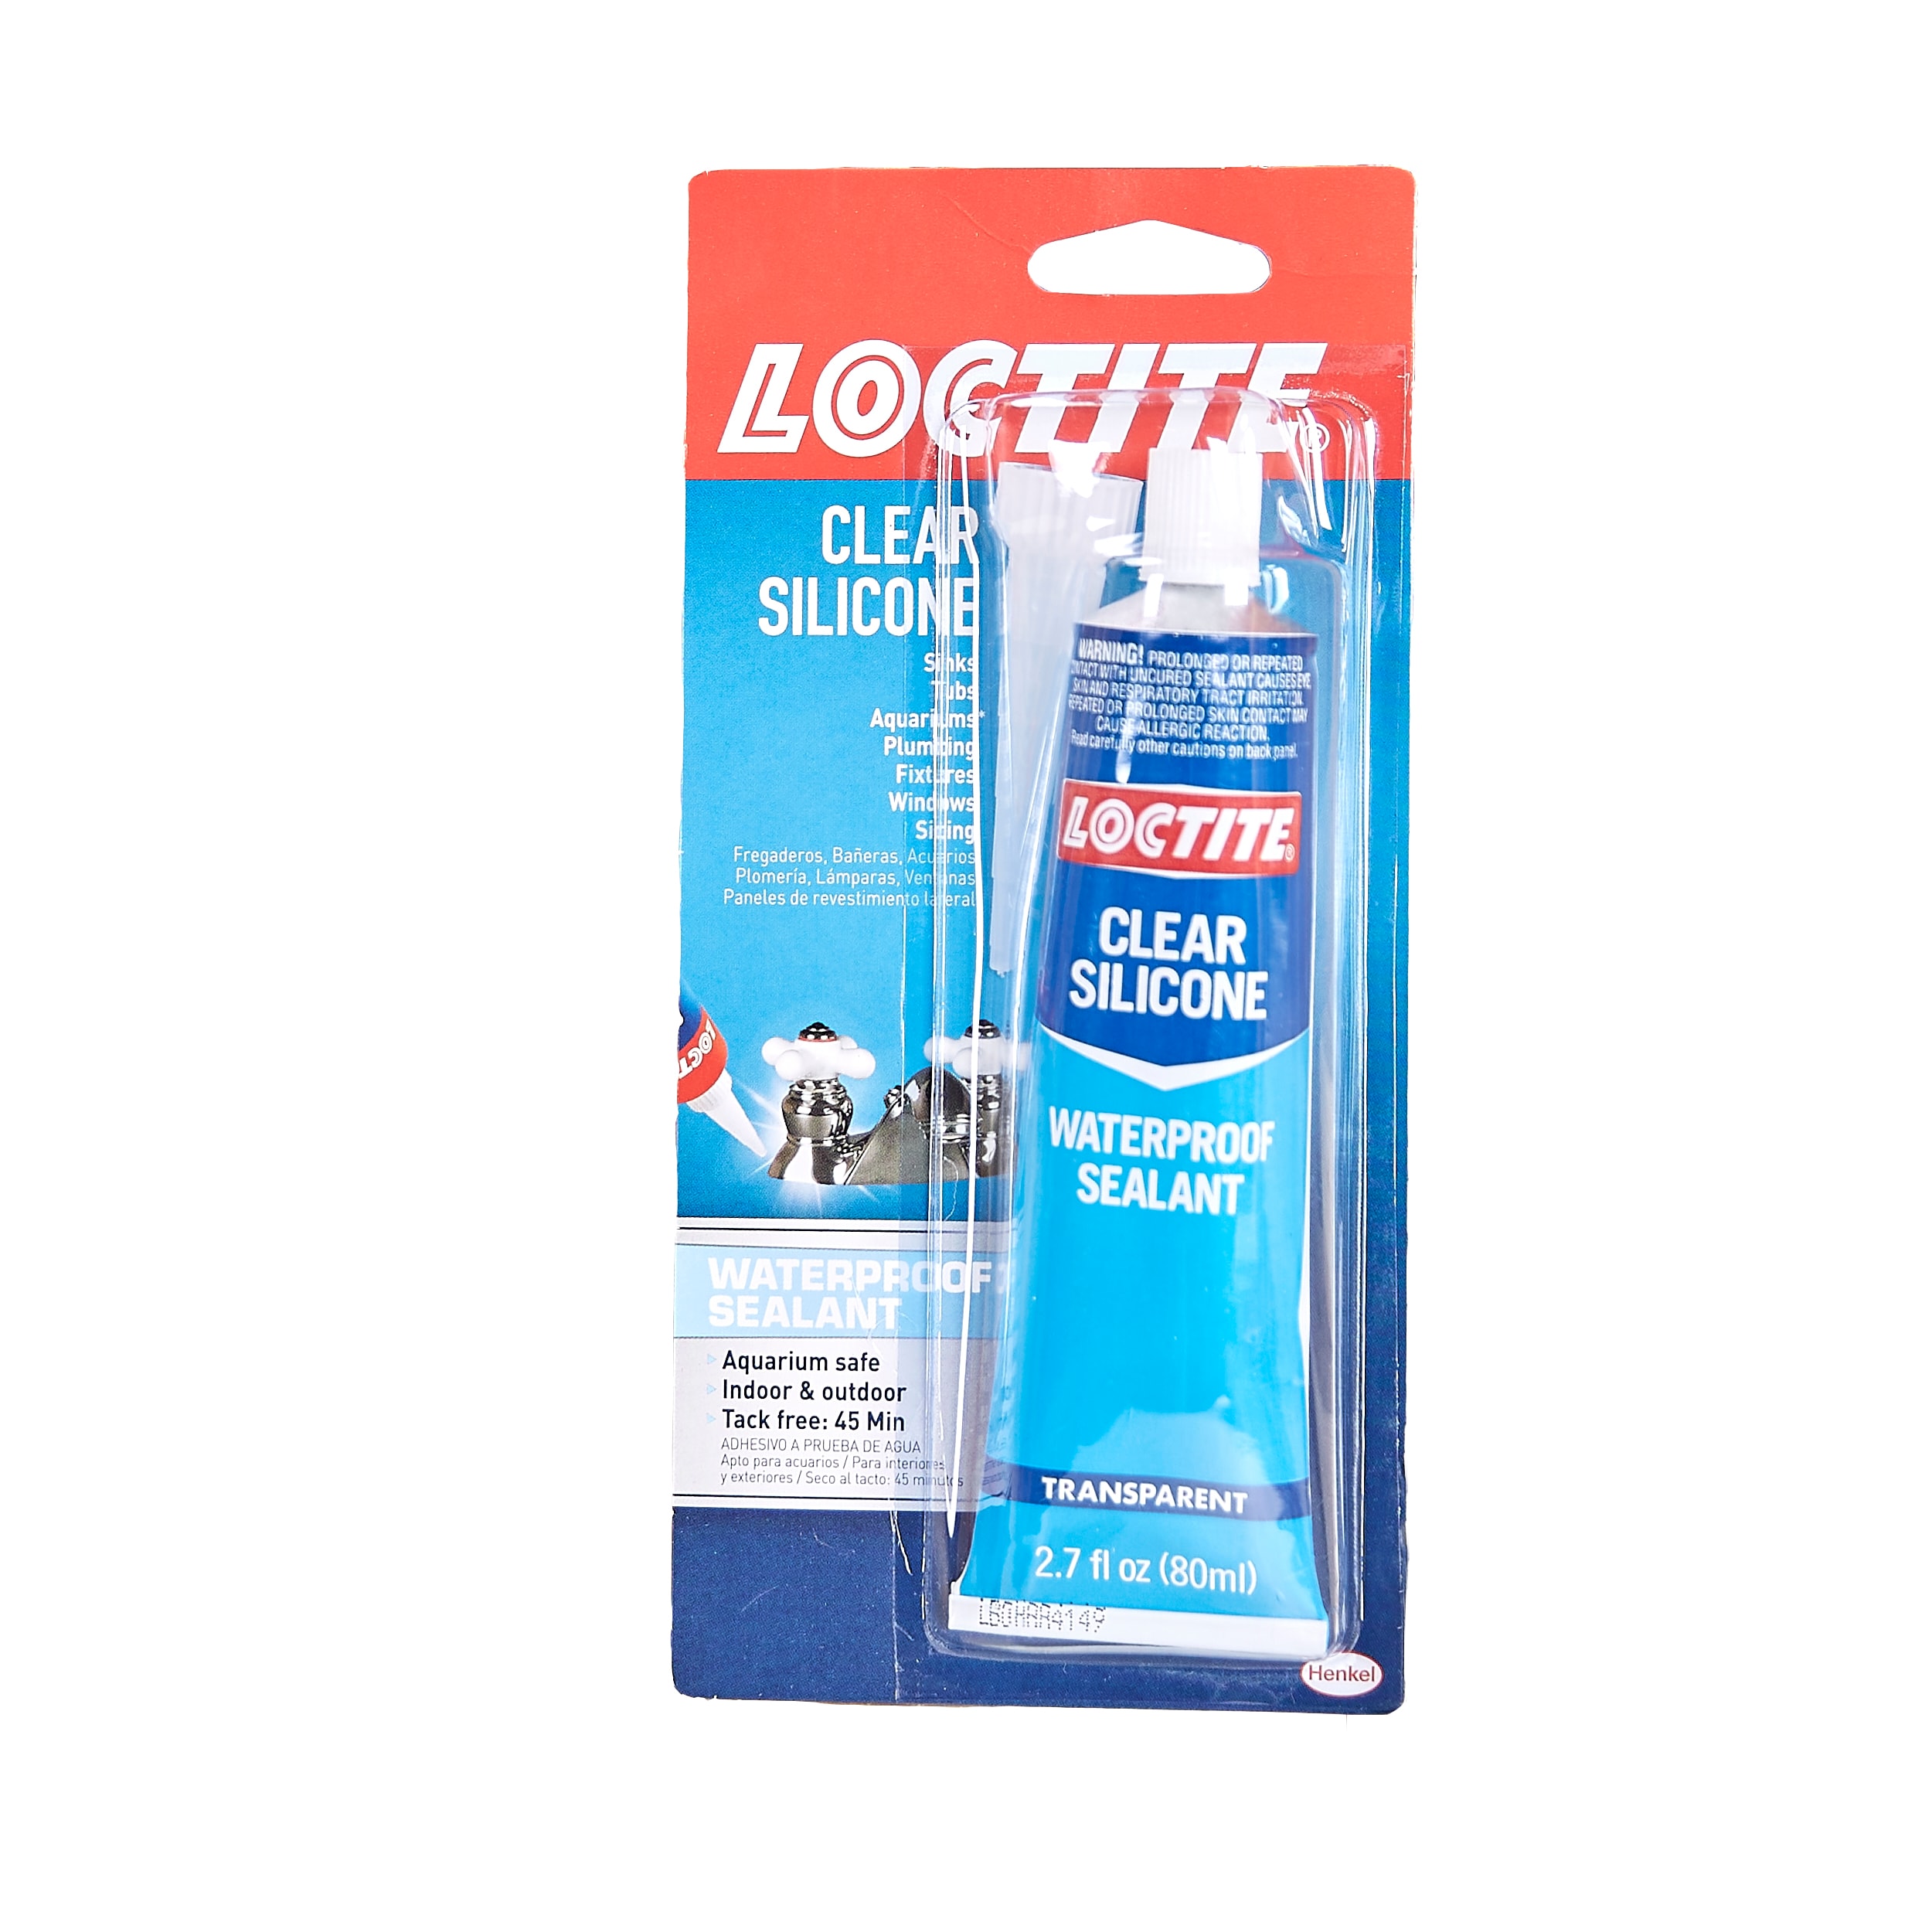 LOCTITE 2.7 OZ SILICONE CLEAR ADHESIVE at